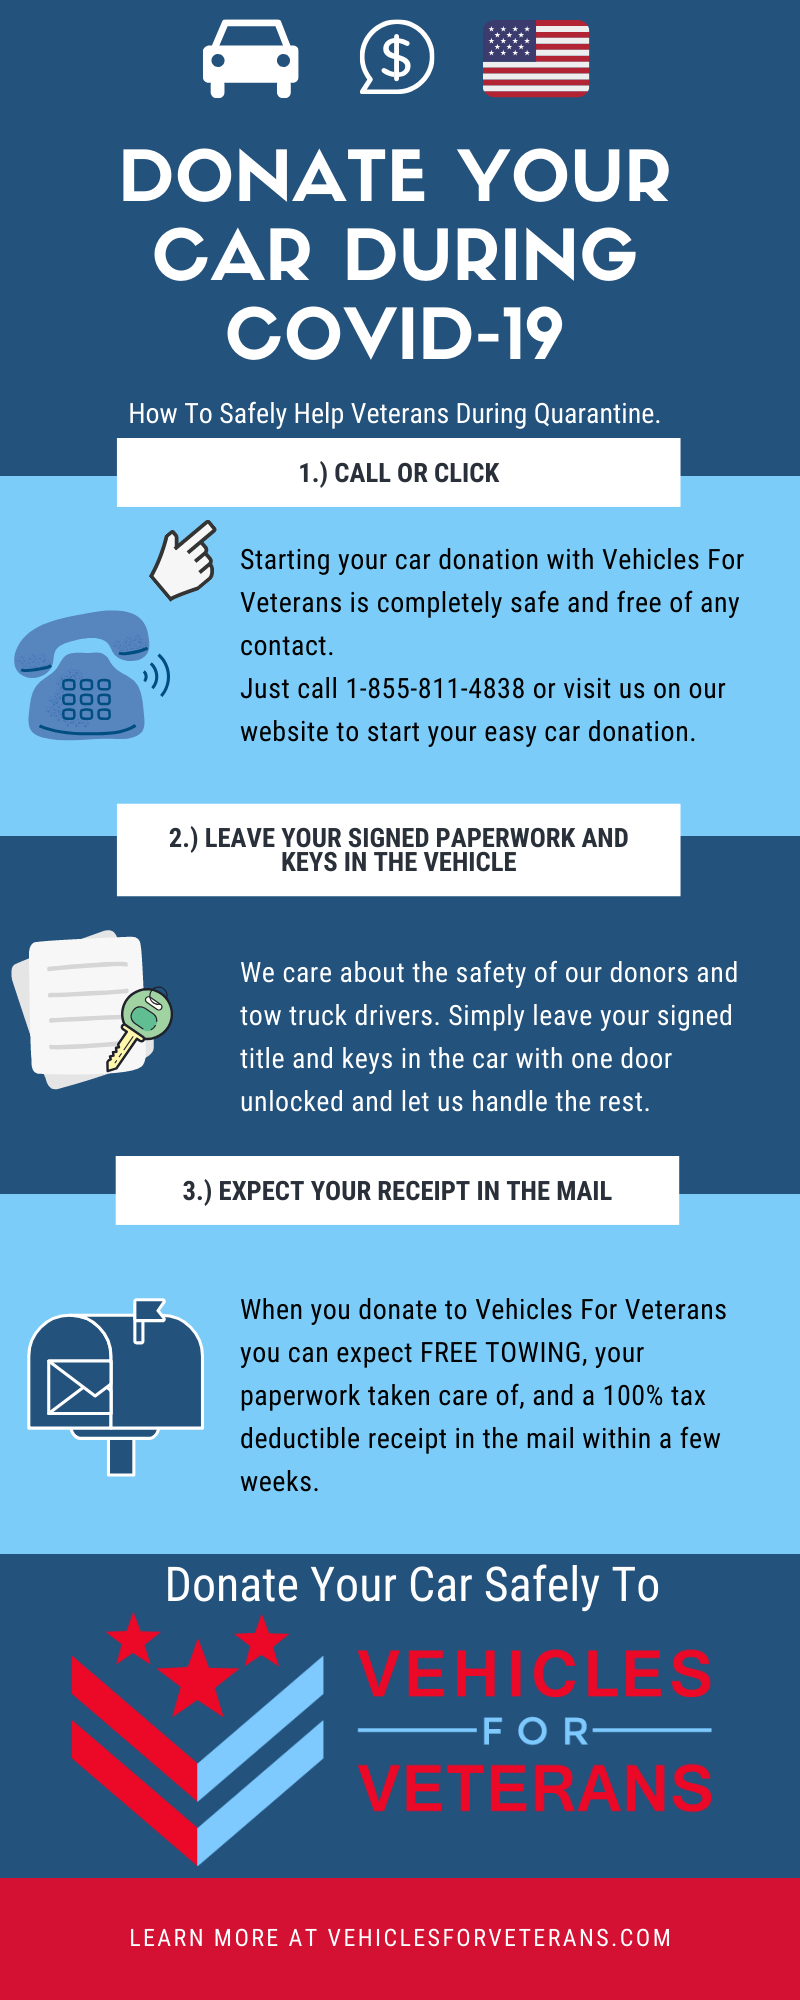 Donate Your Car During COVID-19